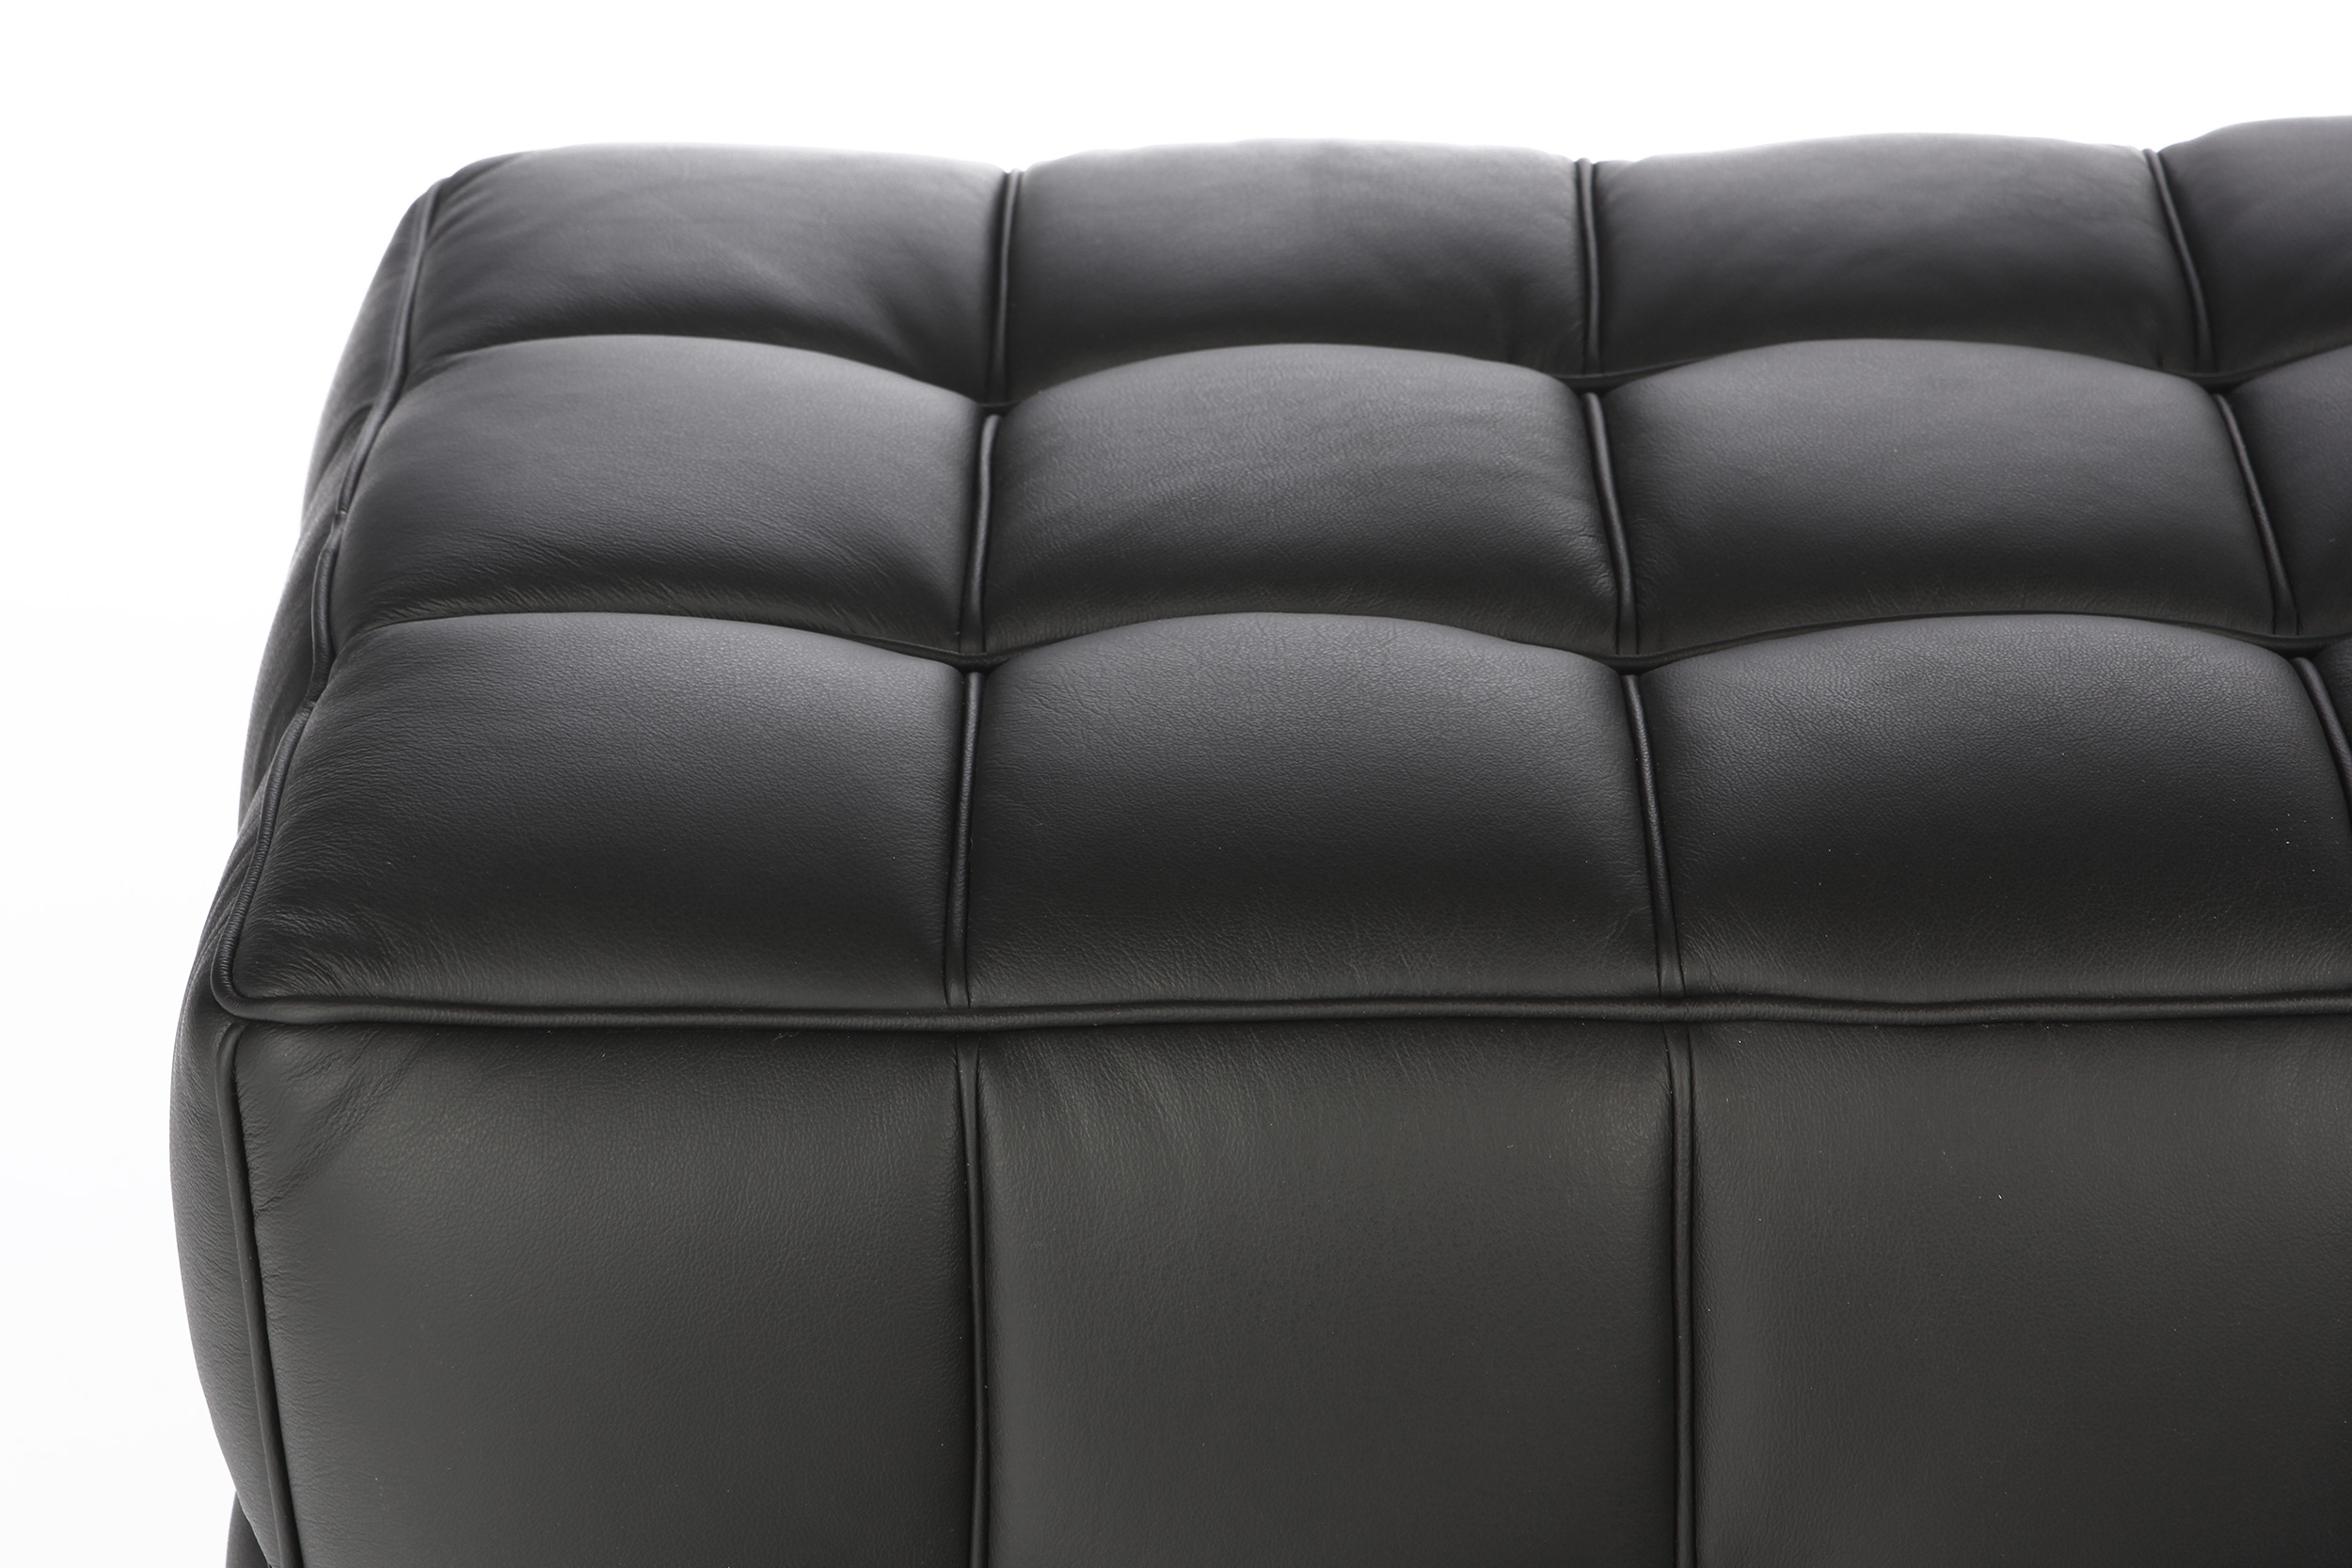 Aniline leather for furniture